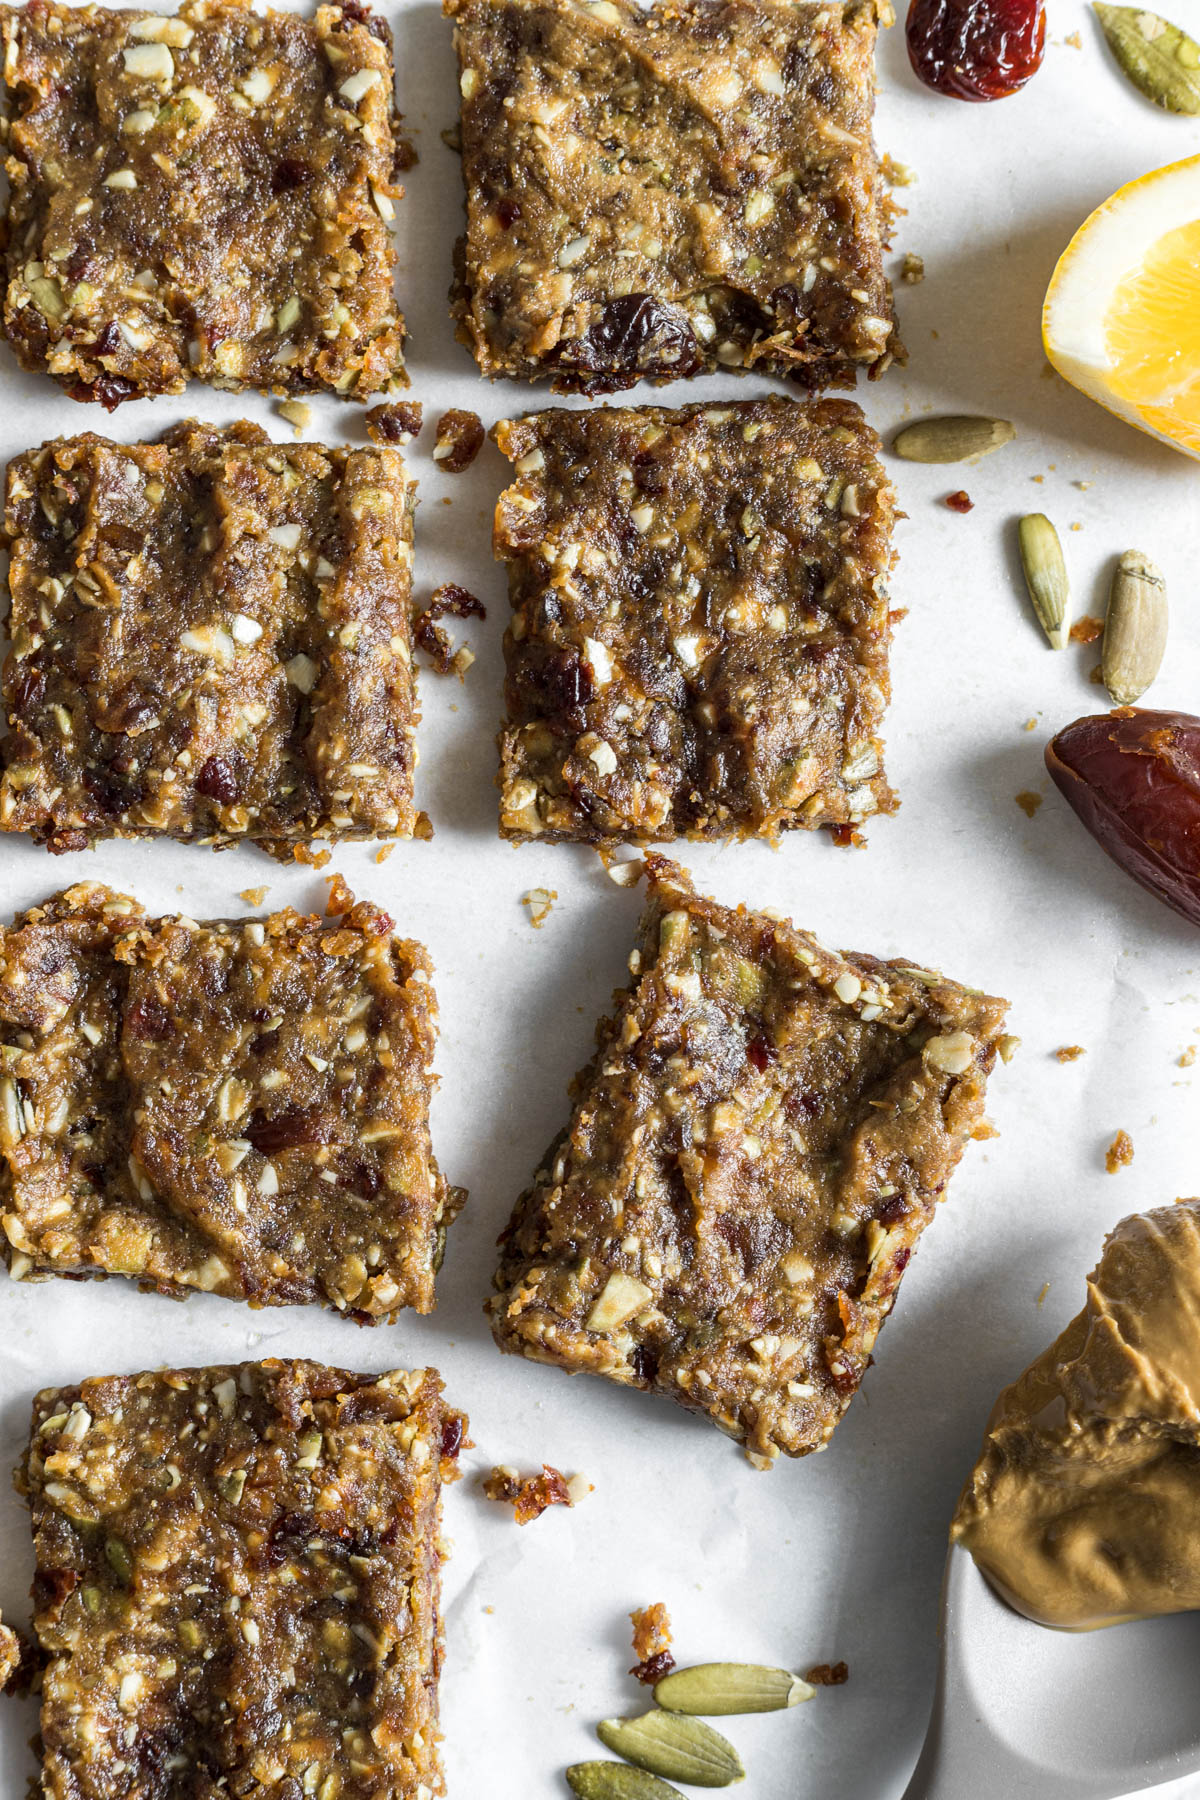 Nut-Free Protein Bars are lying in rows, with one slightly turned. Some sunflower butter, pumpkin seeds, and lemon sit next to the bars.